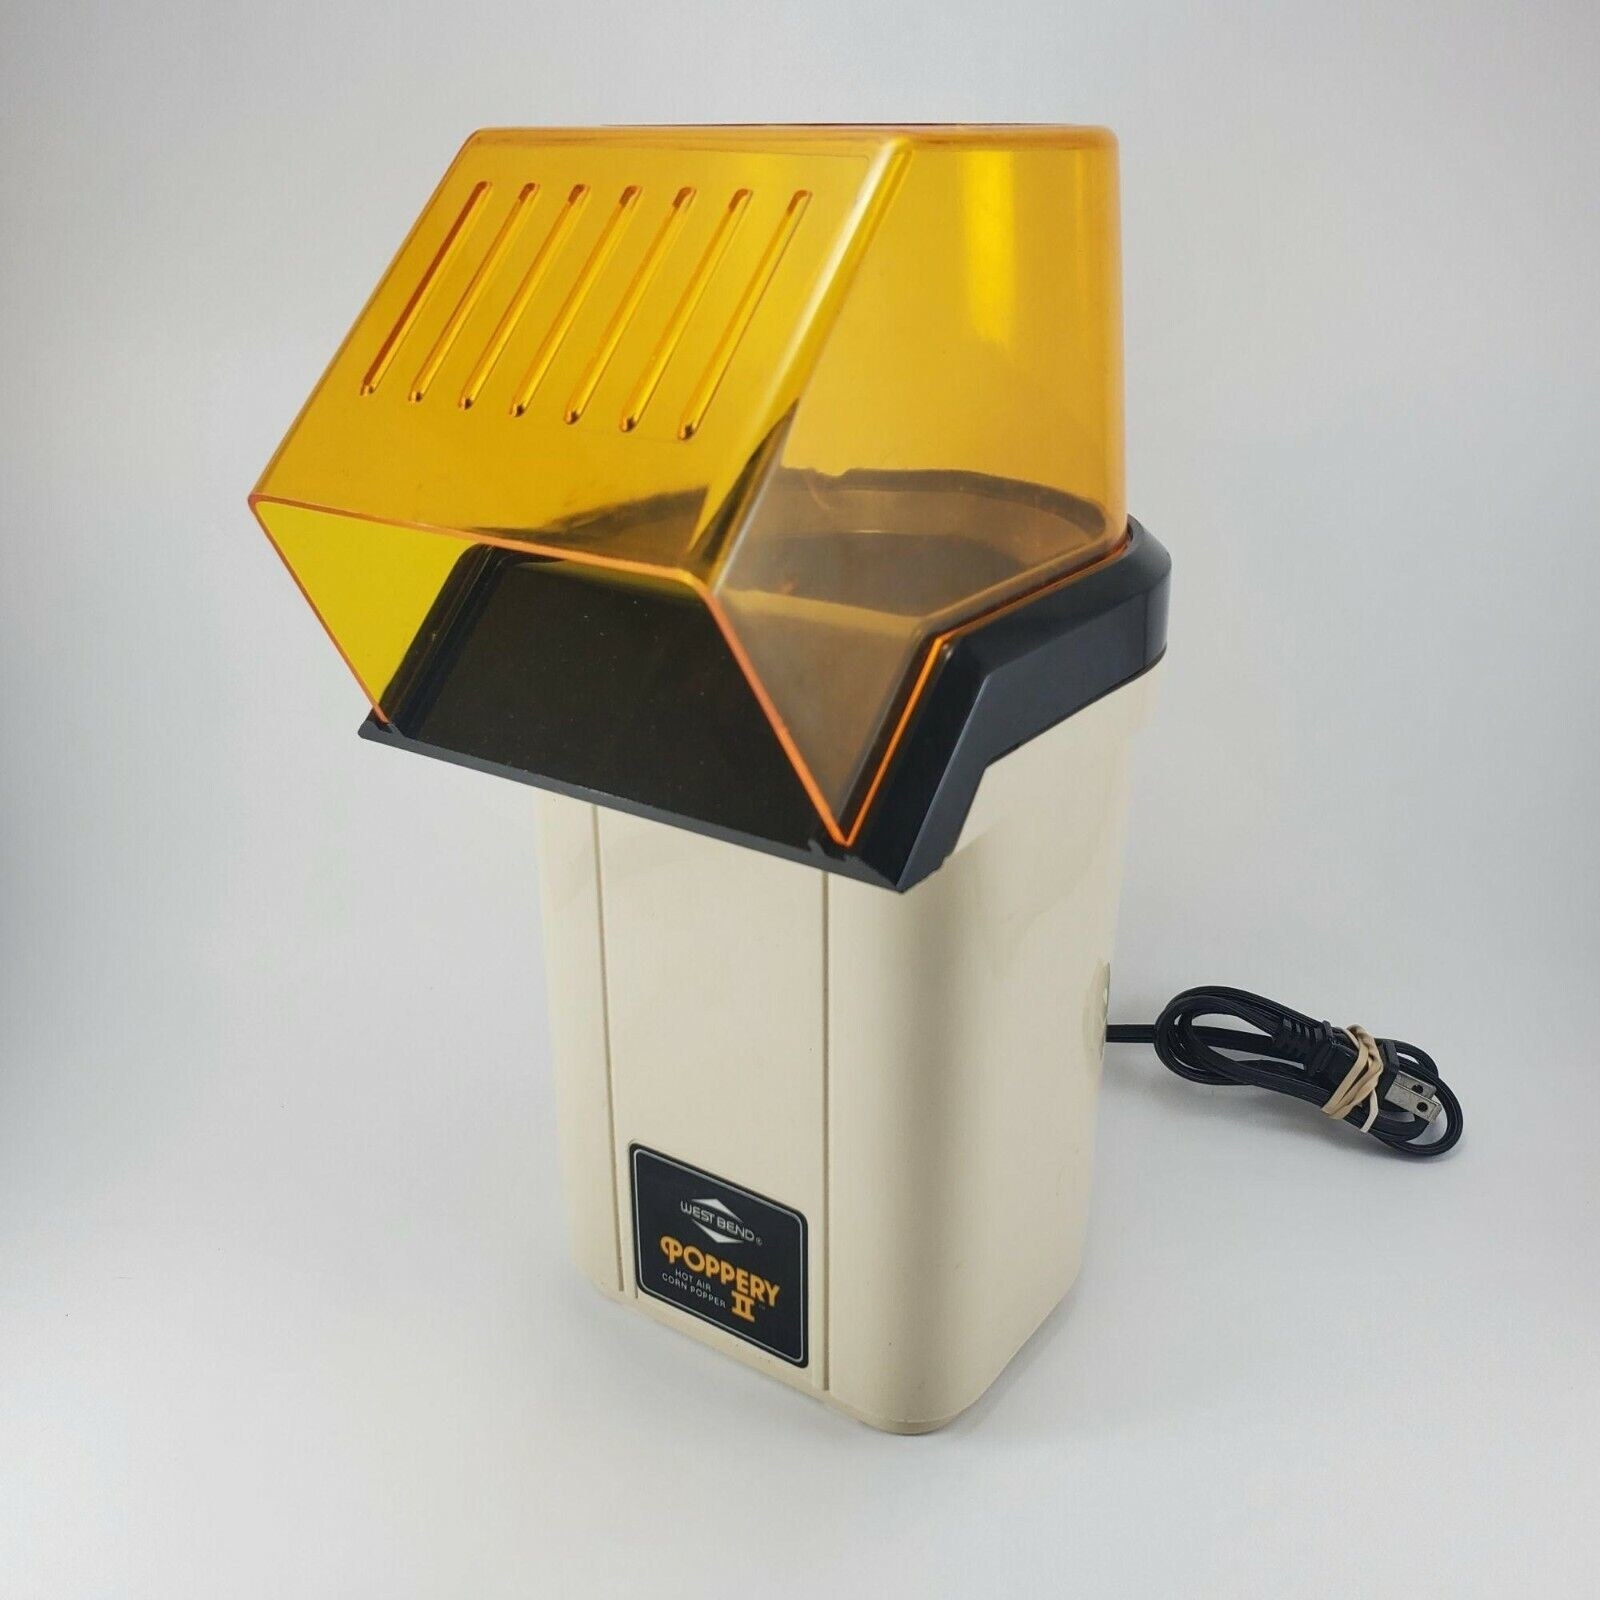 Air popcorn popper with a clear yellow spout